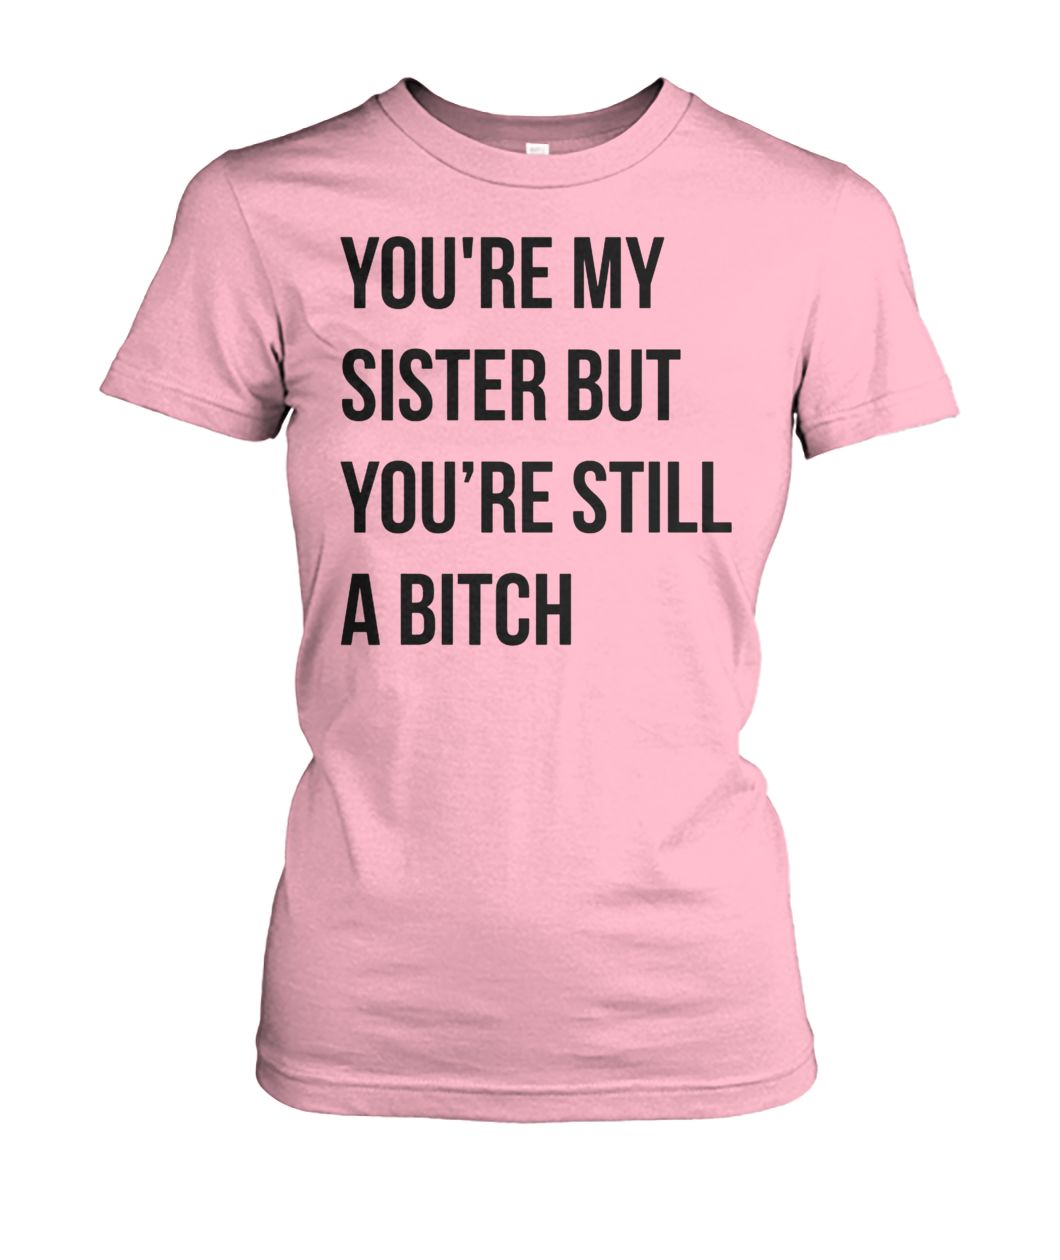 Official you're my sister but you're still a bitch women's crew tee